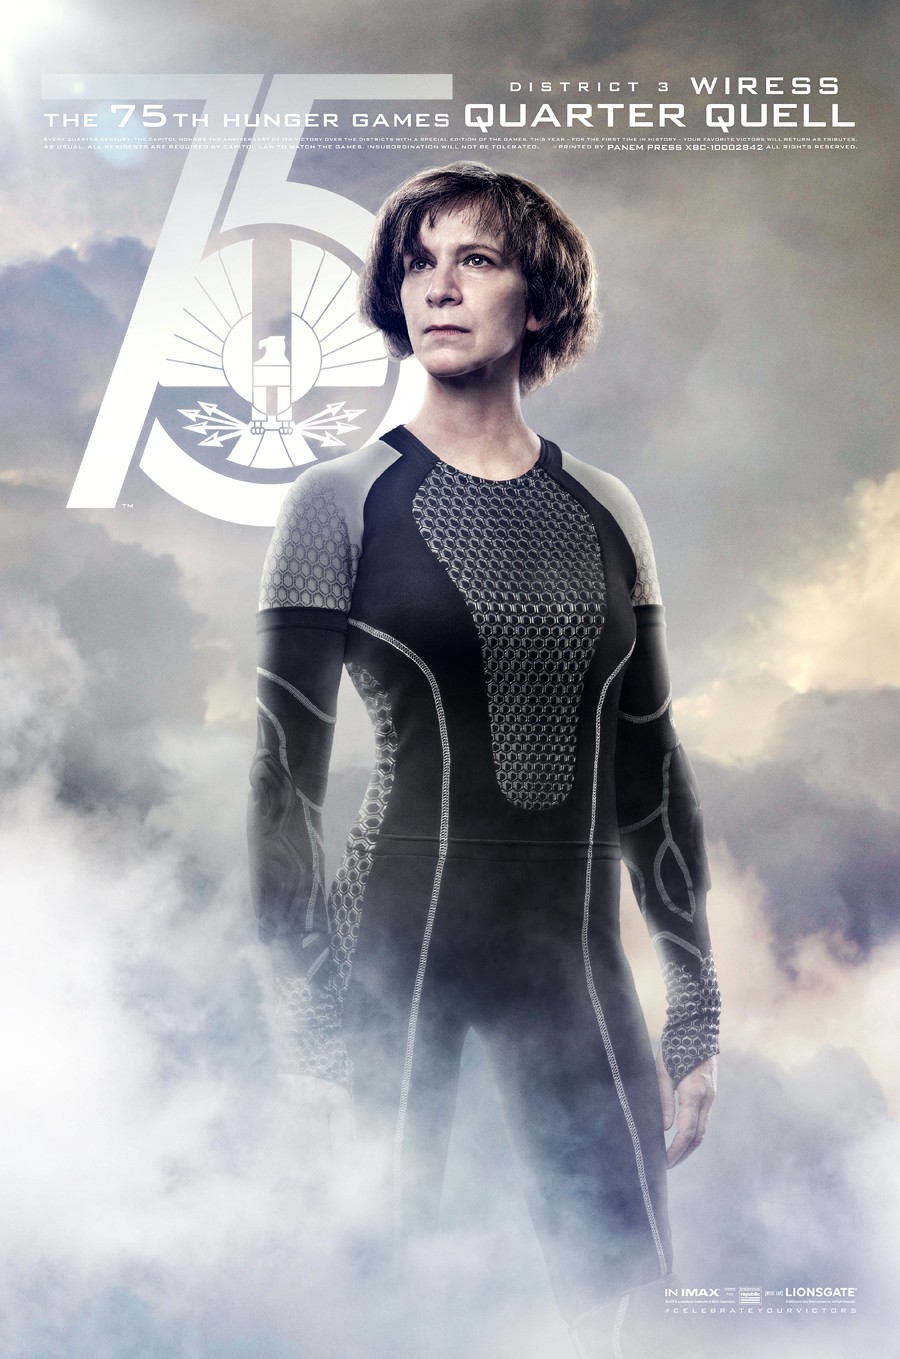 The Hunger Games: Catching Fire - Wikipedia